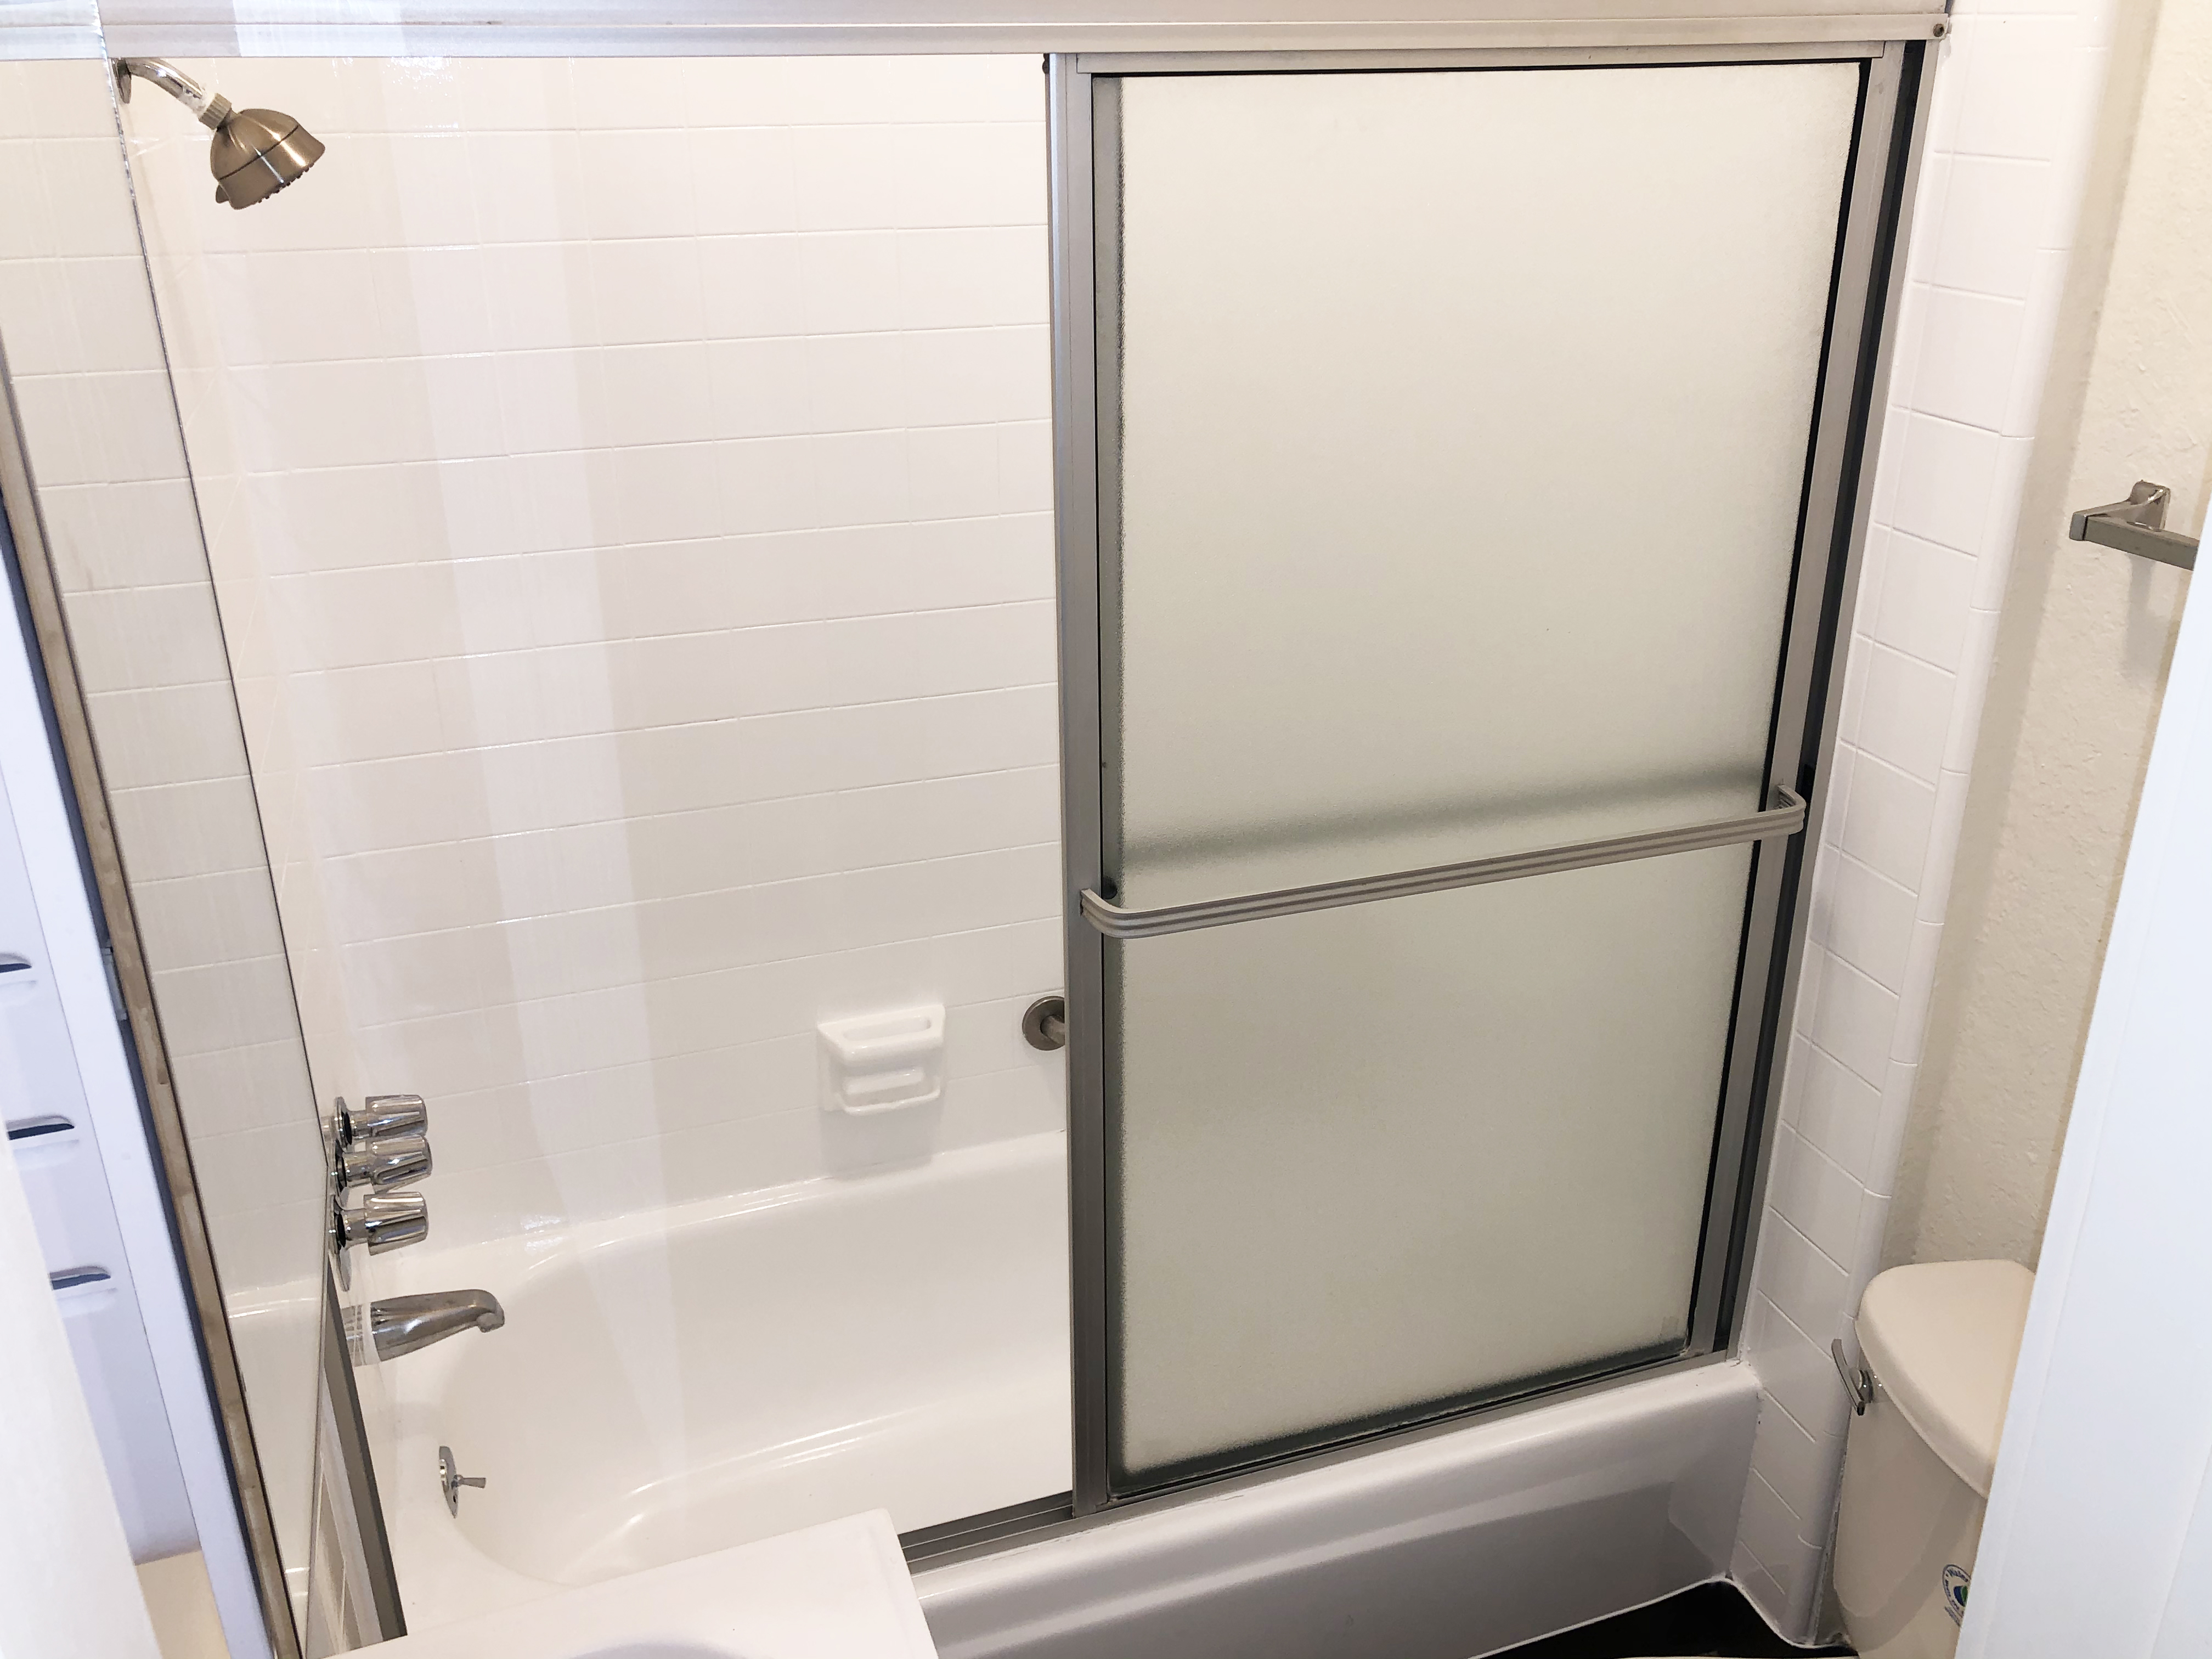 Close up view of the restroom showing the bathtub with showing and sliding door.